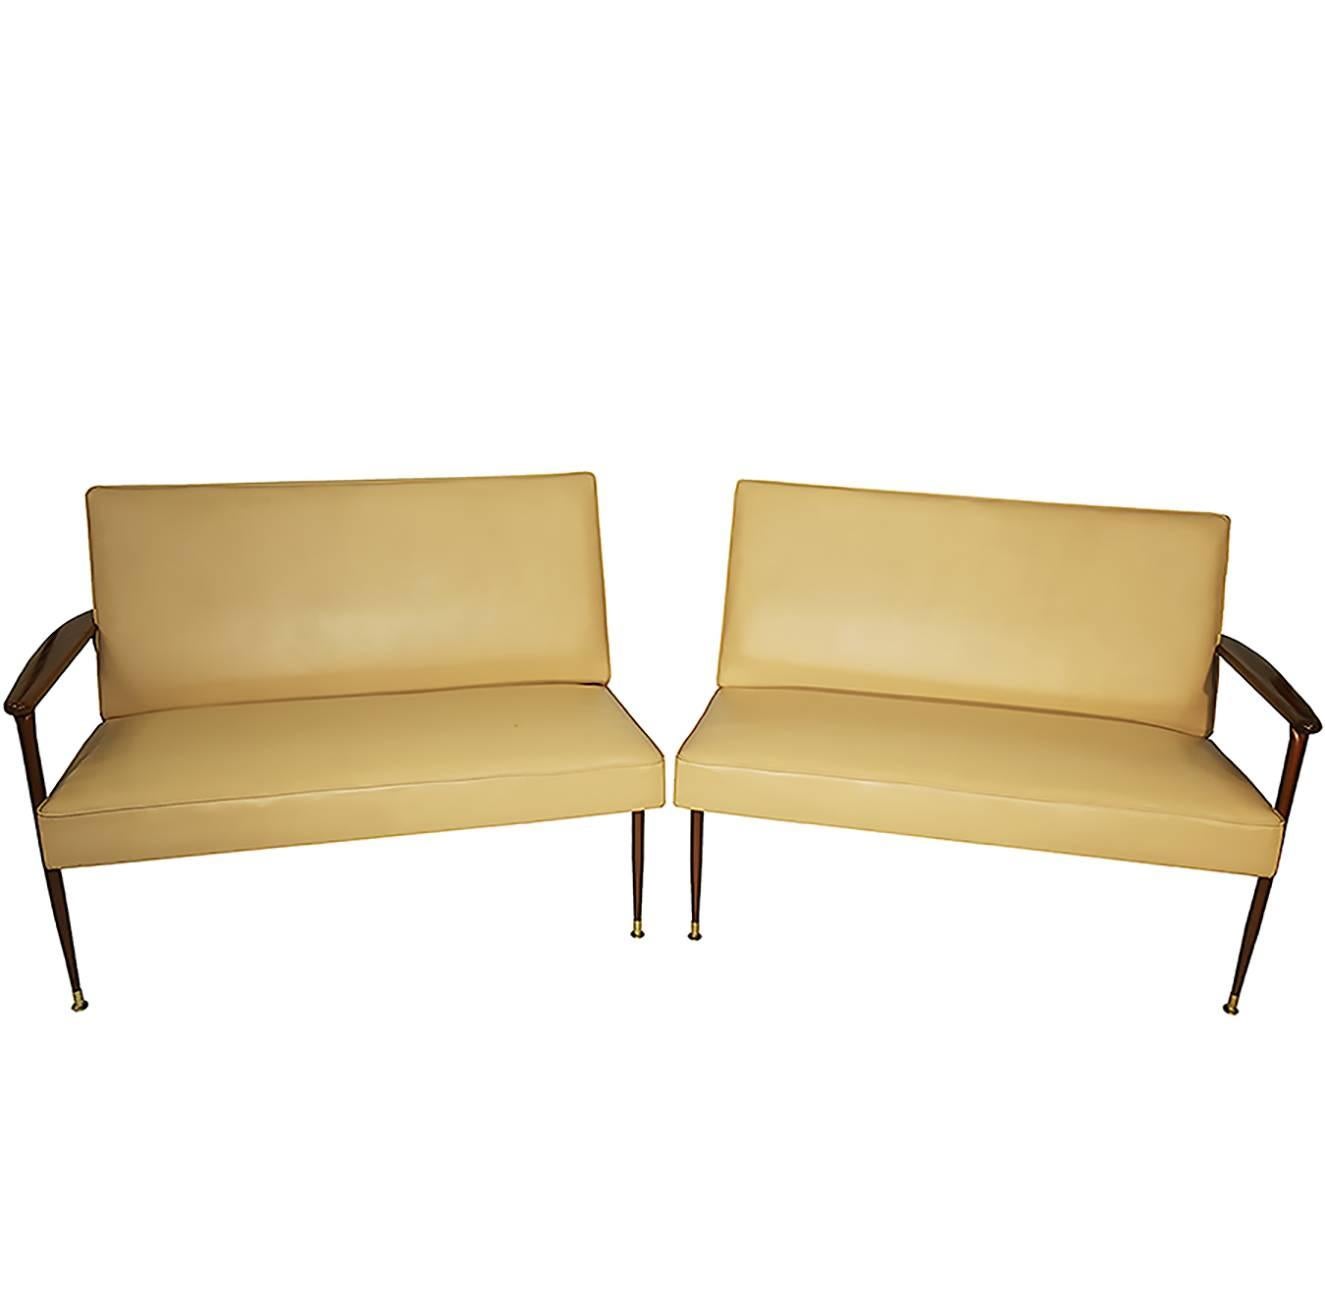 Two-piece sleek midcentury light cappuccino color faux leather loveseats with elegant shaped mahogany arms and legs. The legs end in elegant brass tips the loveseats can be placed together as a single sofa or used as two separate love seats. The